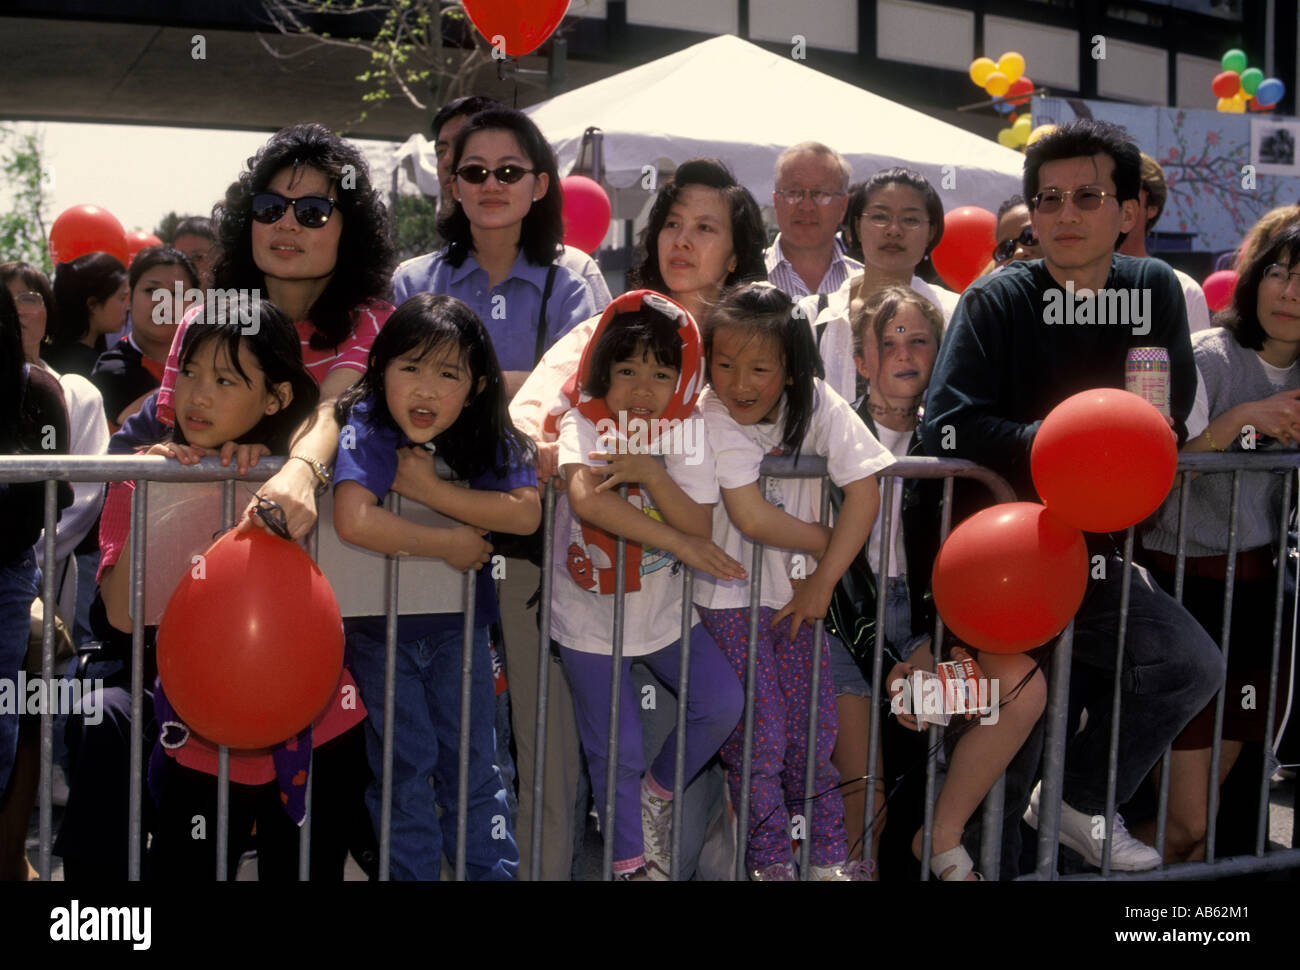 people, spectators, watching parade, Cherry Blossom Festival, Japantown, San Francisco, California, United States Stock Photo